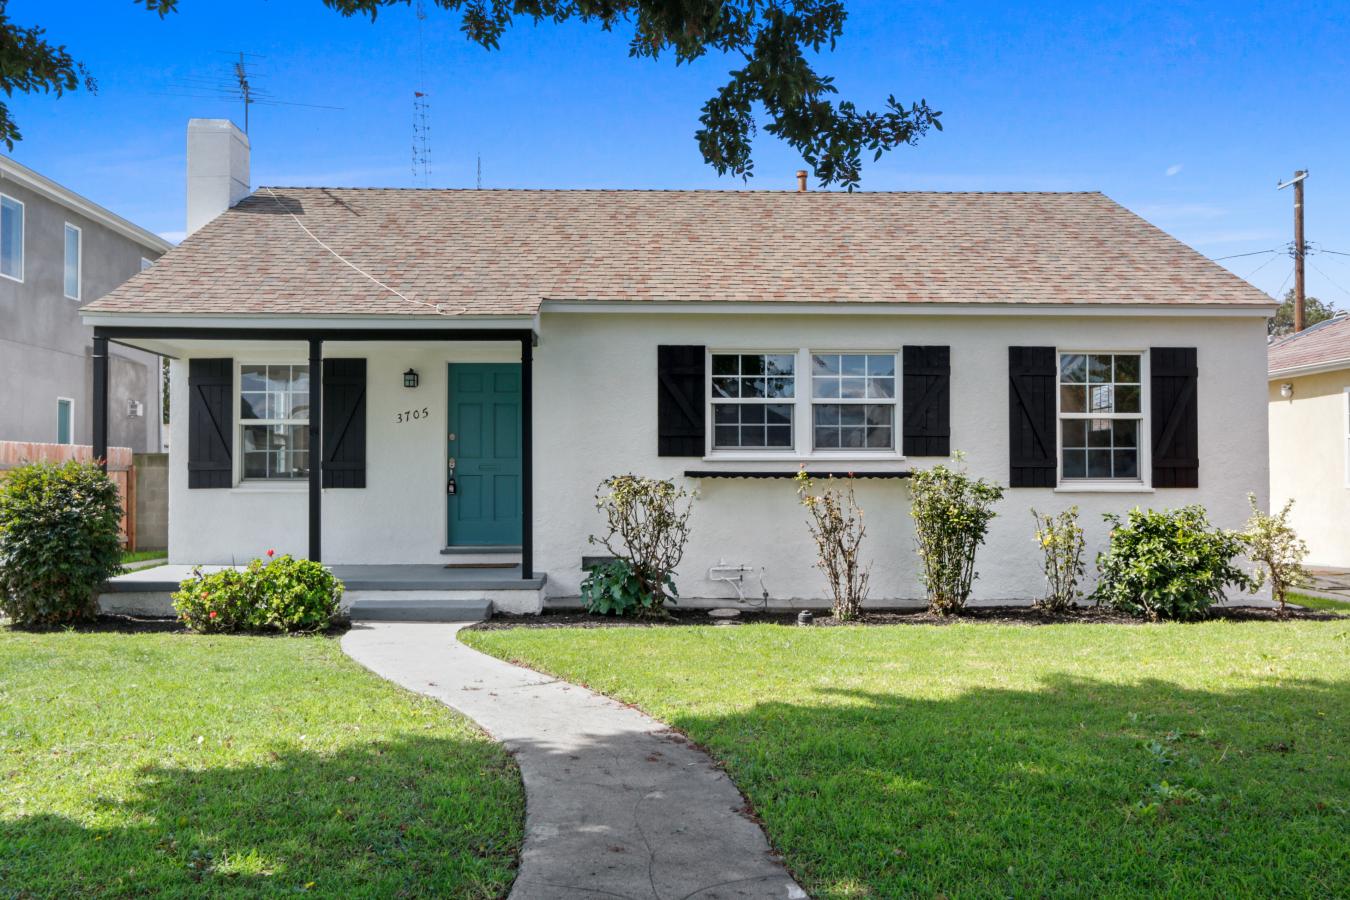 3705 Hillcrest Drive, Los Angeles, California, 90016, United States, 2 Bedrooms Bedrooms, ,2 BathroomsBathrooms,Residential,For Sale,3705 Hillcrest Drive,1489324